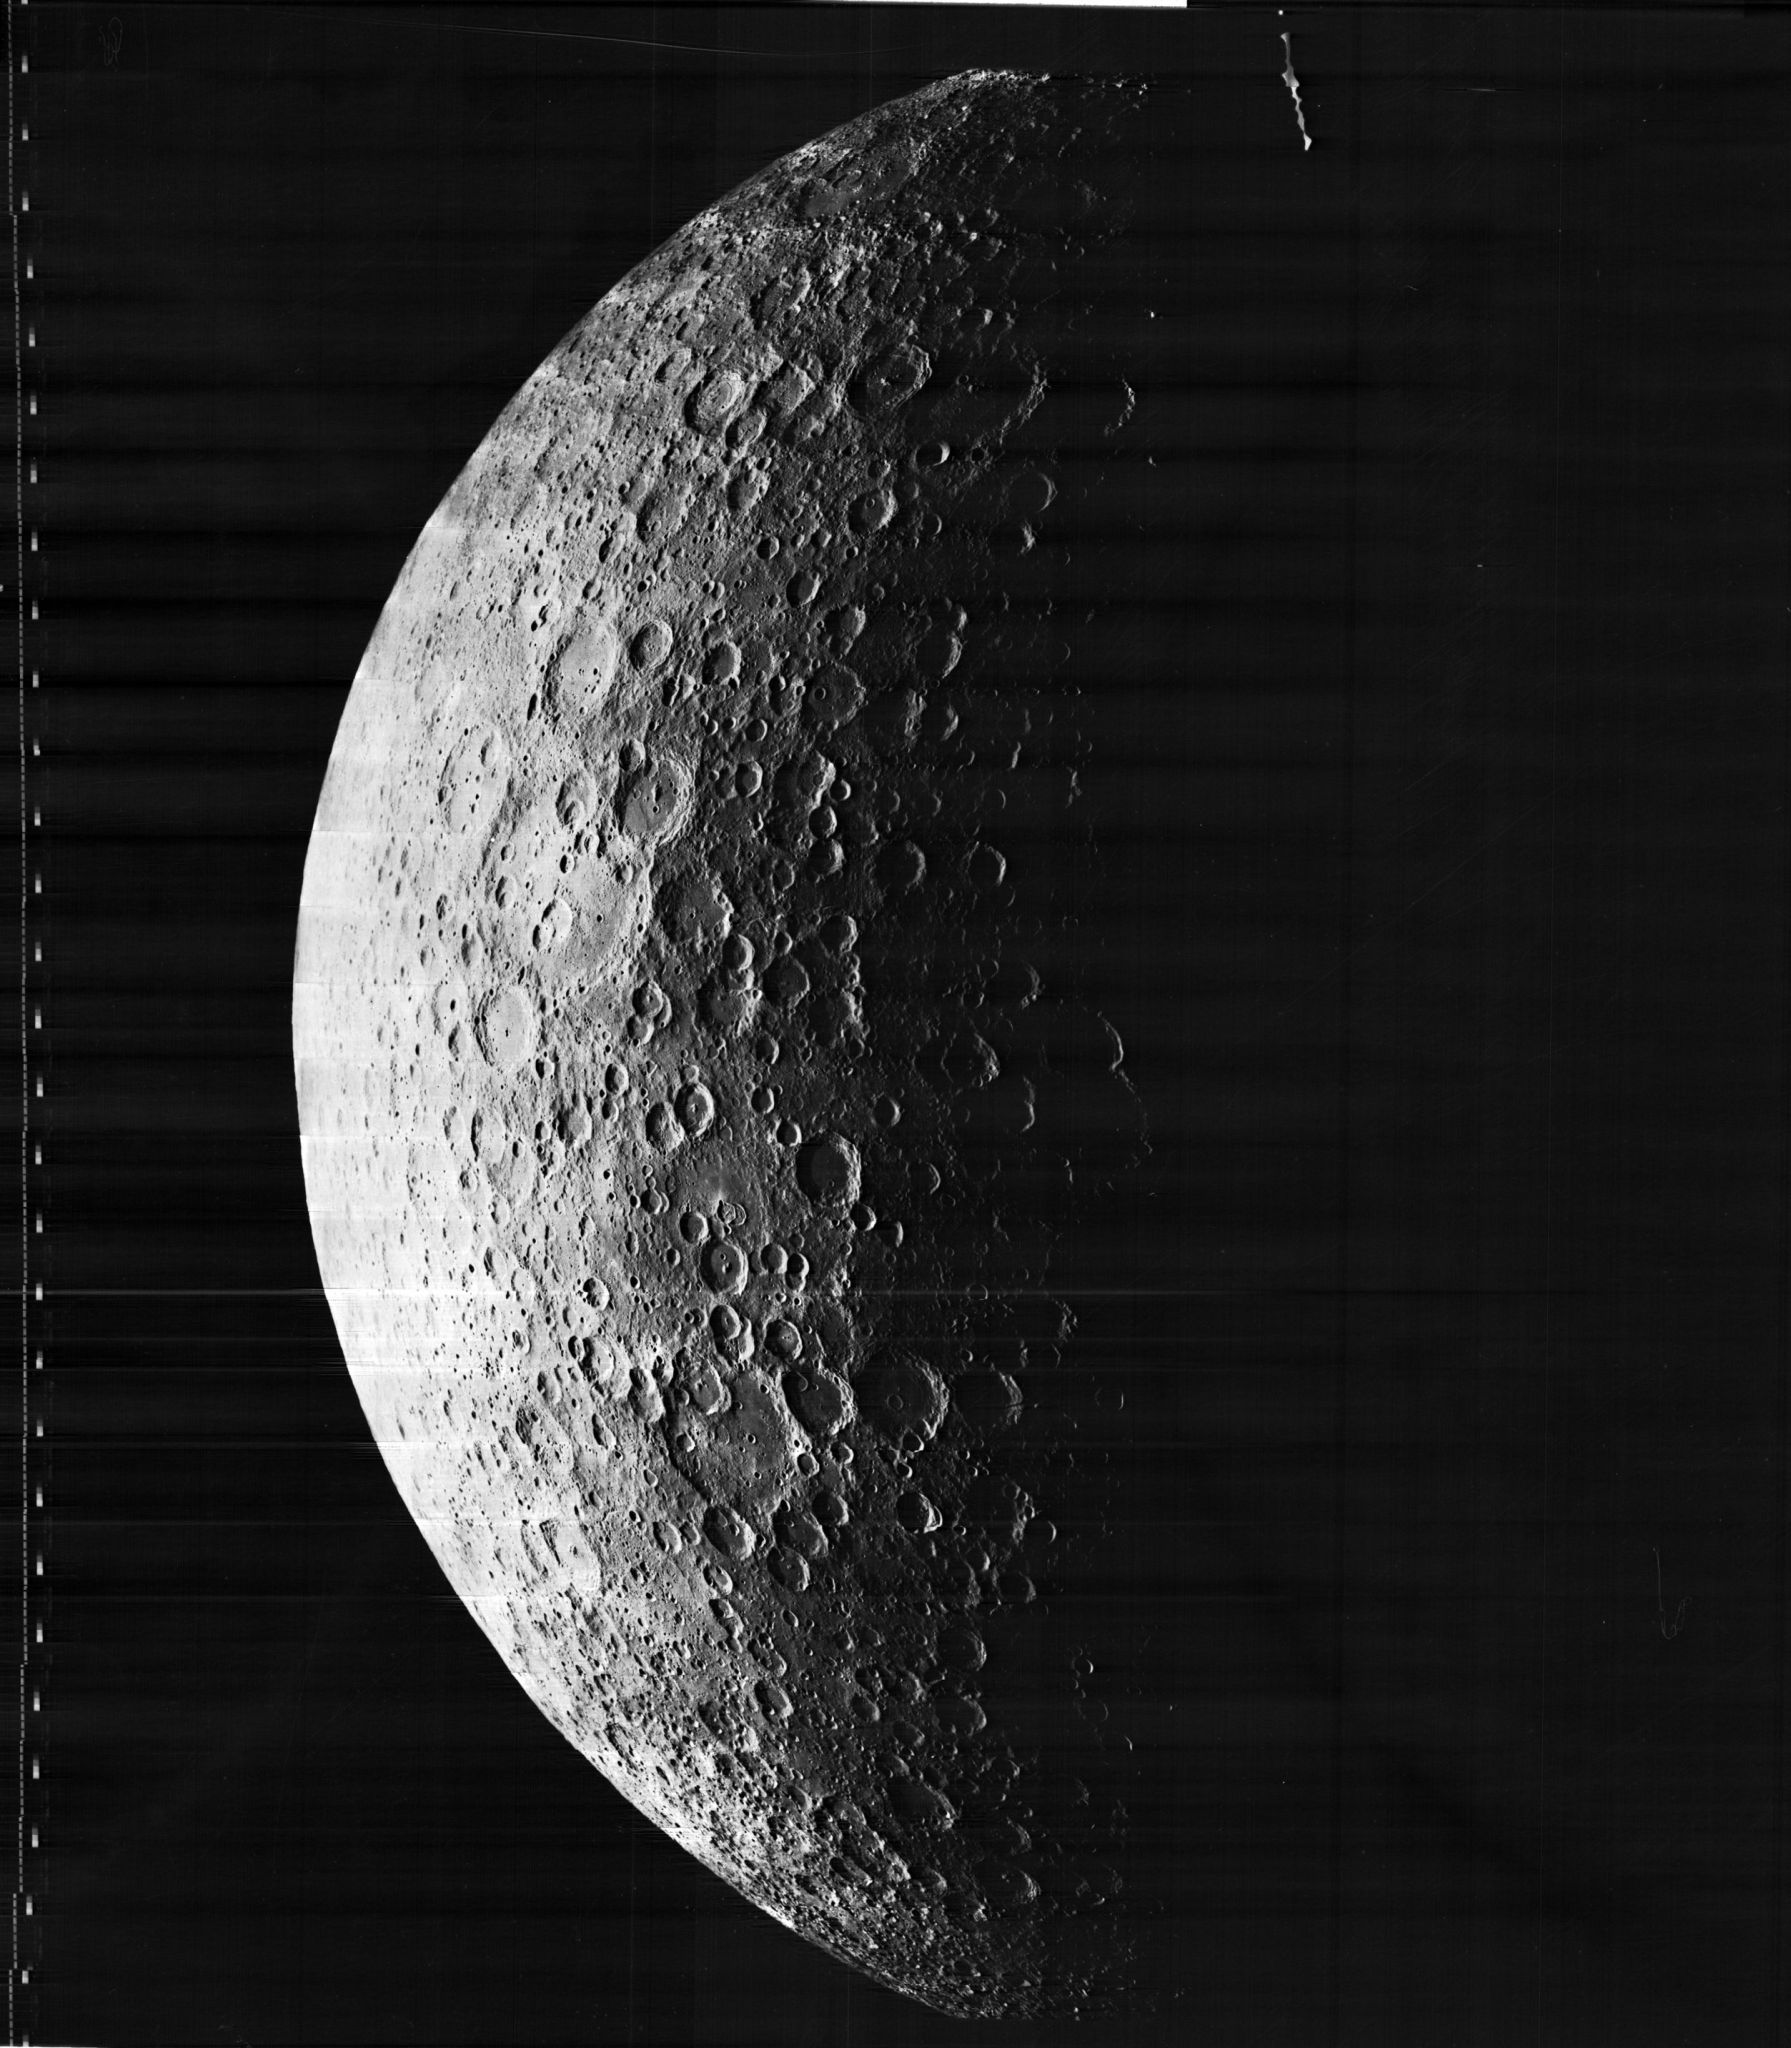 Picture of the moon taken by Lunar Orbiter 5